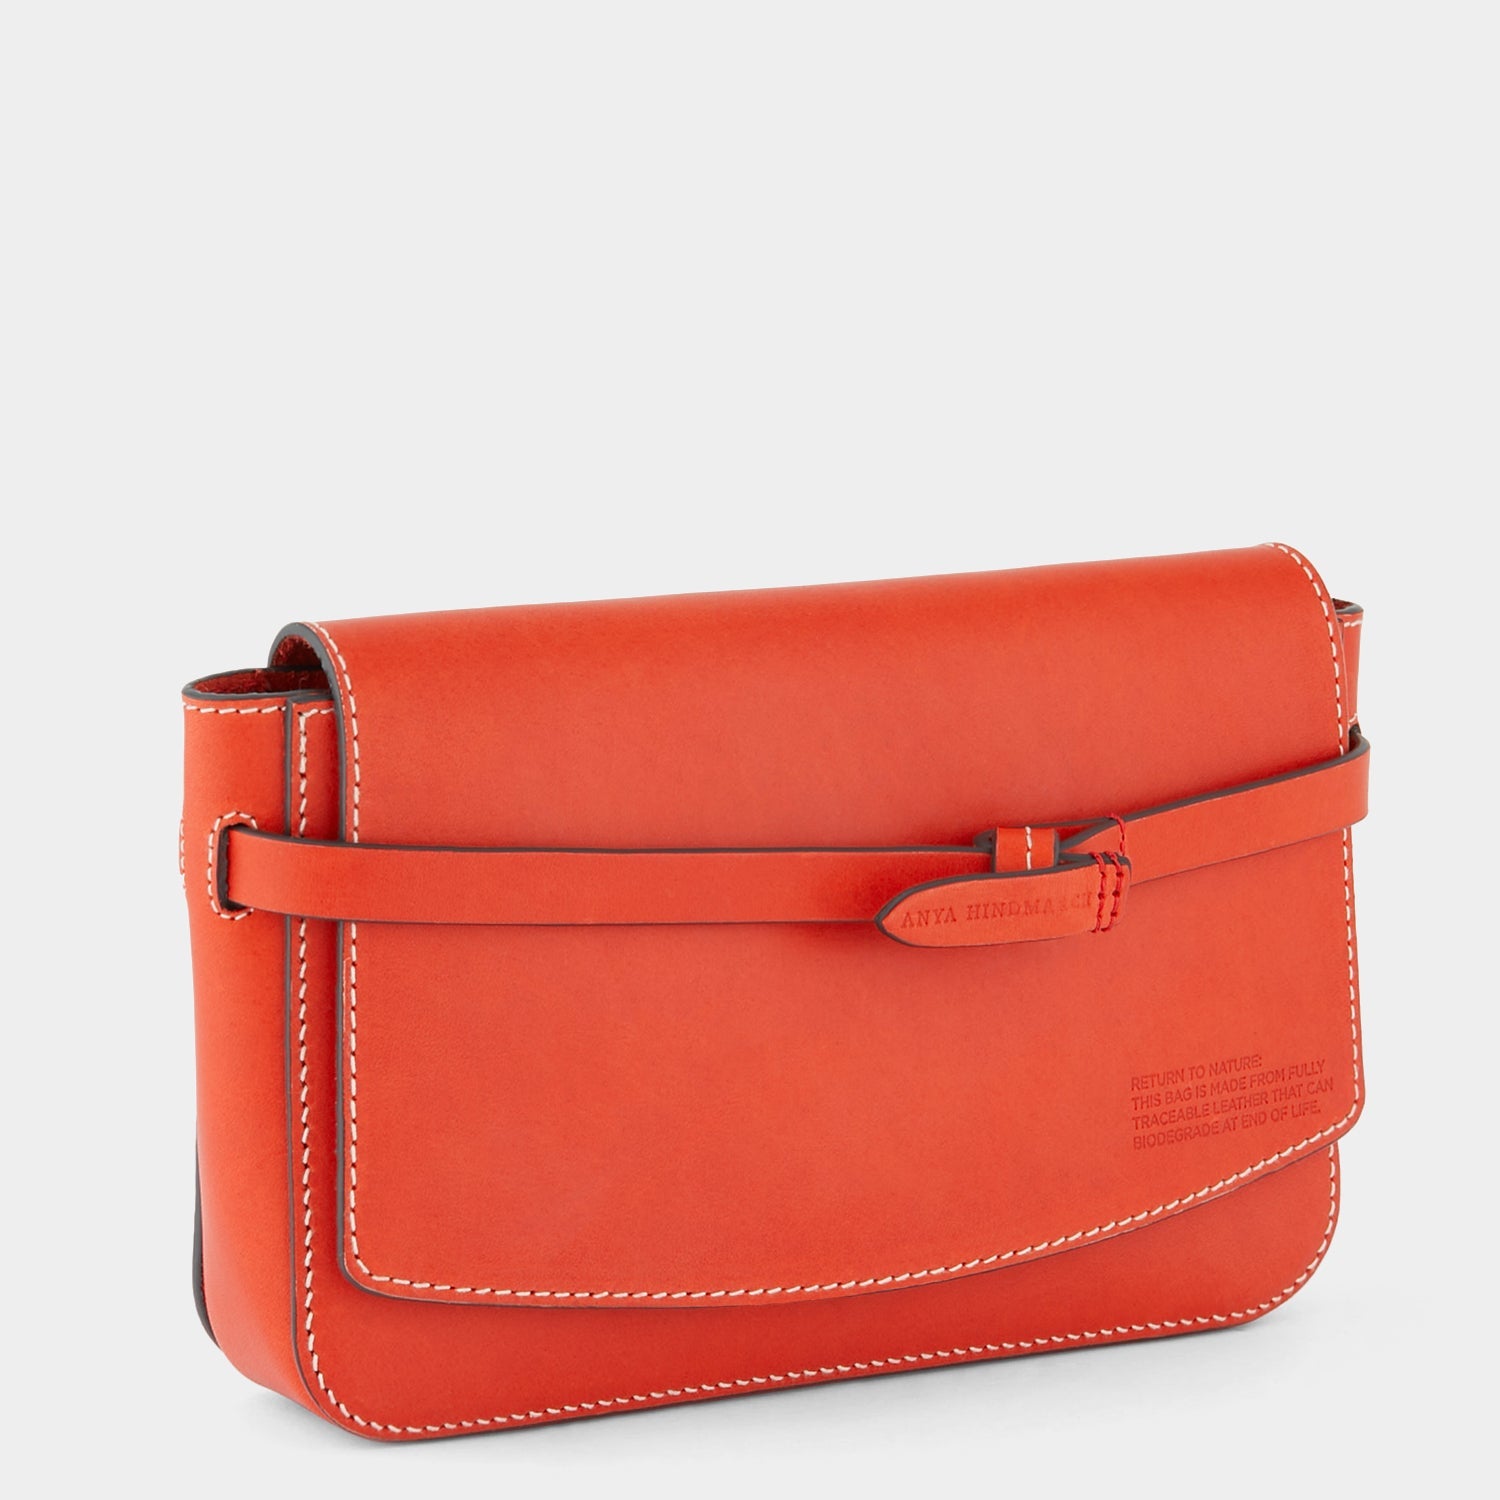 Return to Nature Clutch -

                  
                    Compostable Leather in Flame Red -
                  

                  Anya Hindmarch EU
